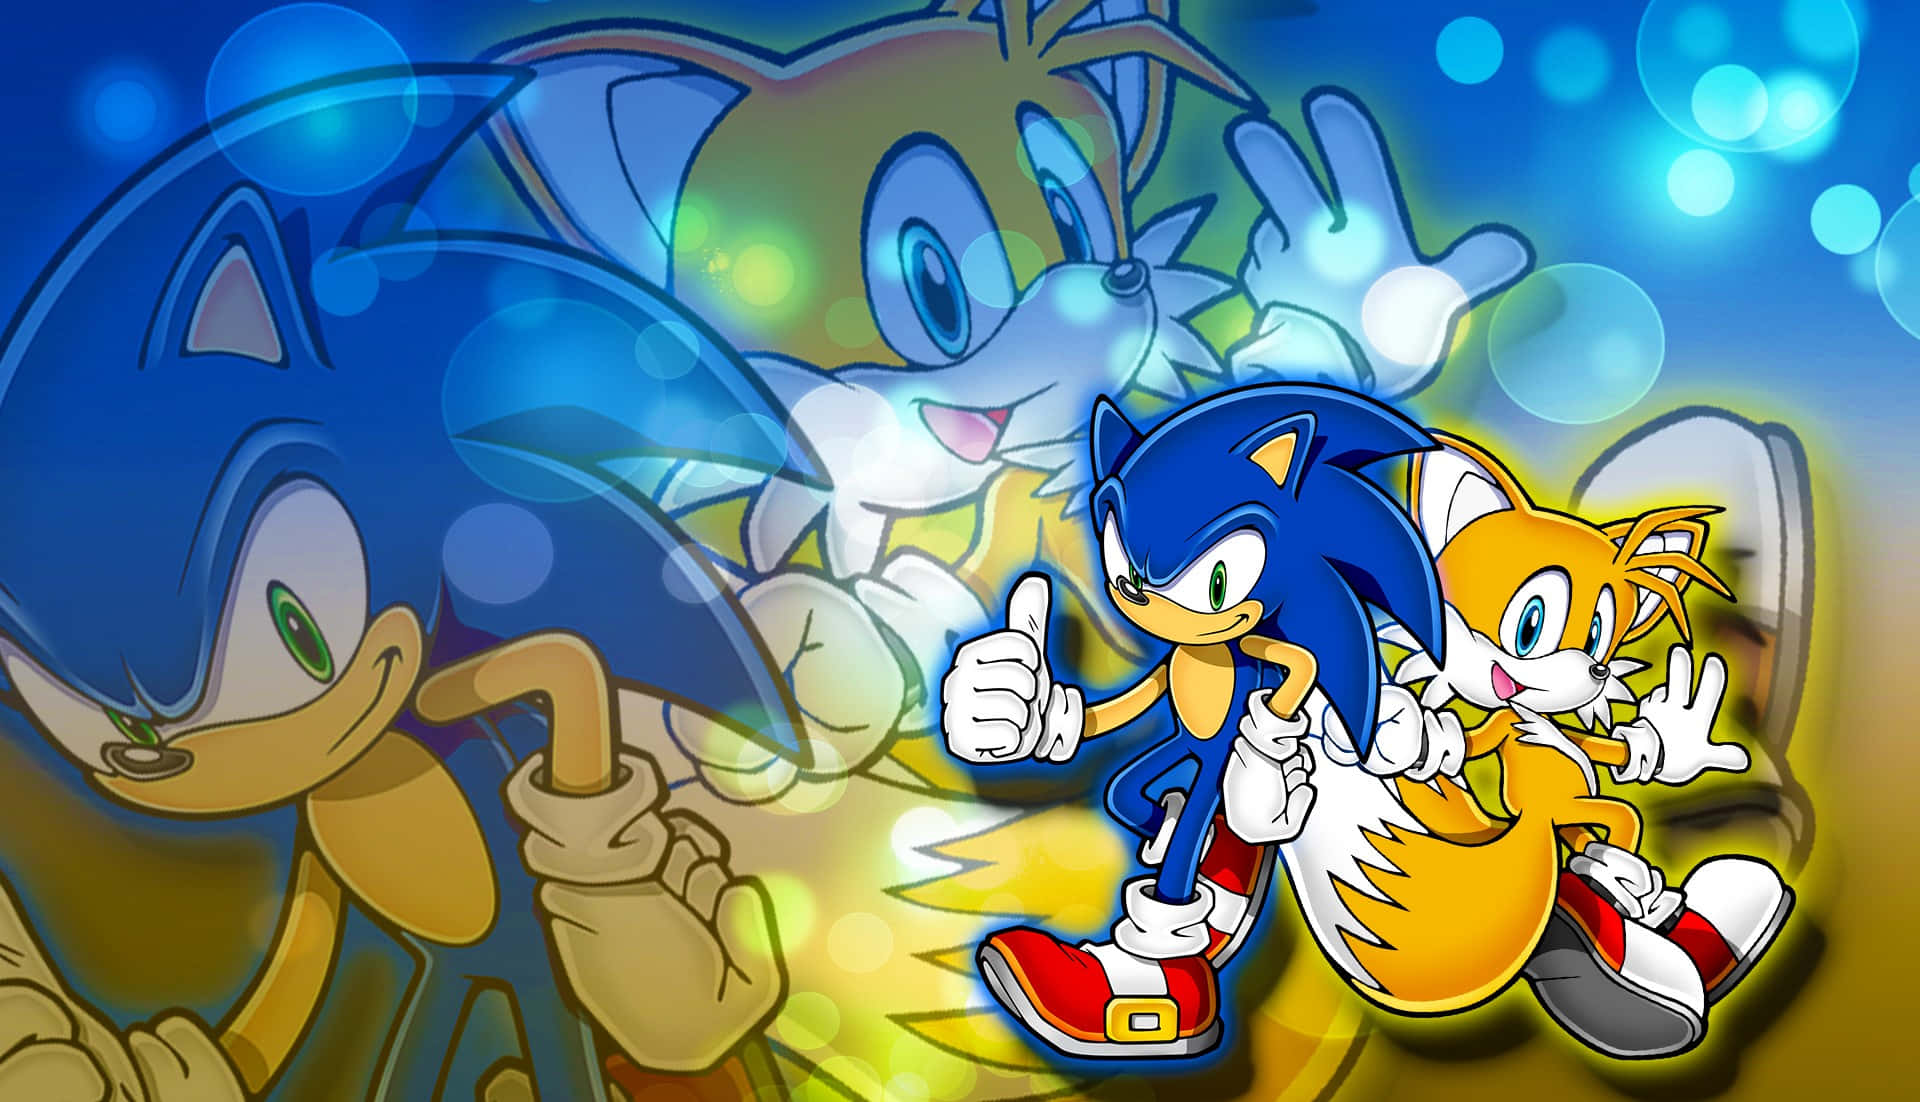 Sonic and Tails: The Dynamic Duo Wallpaper